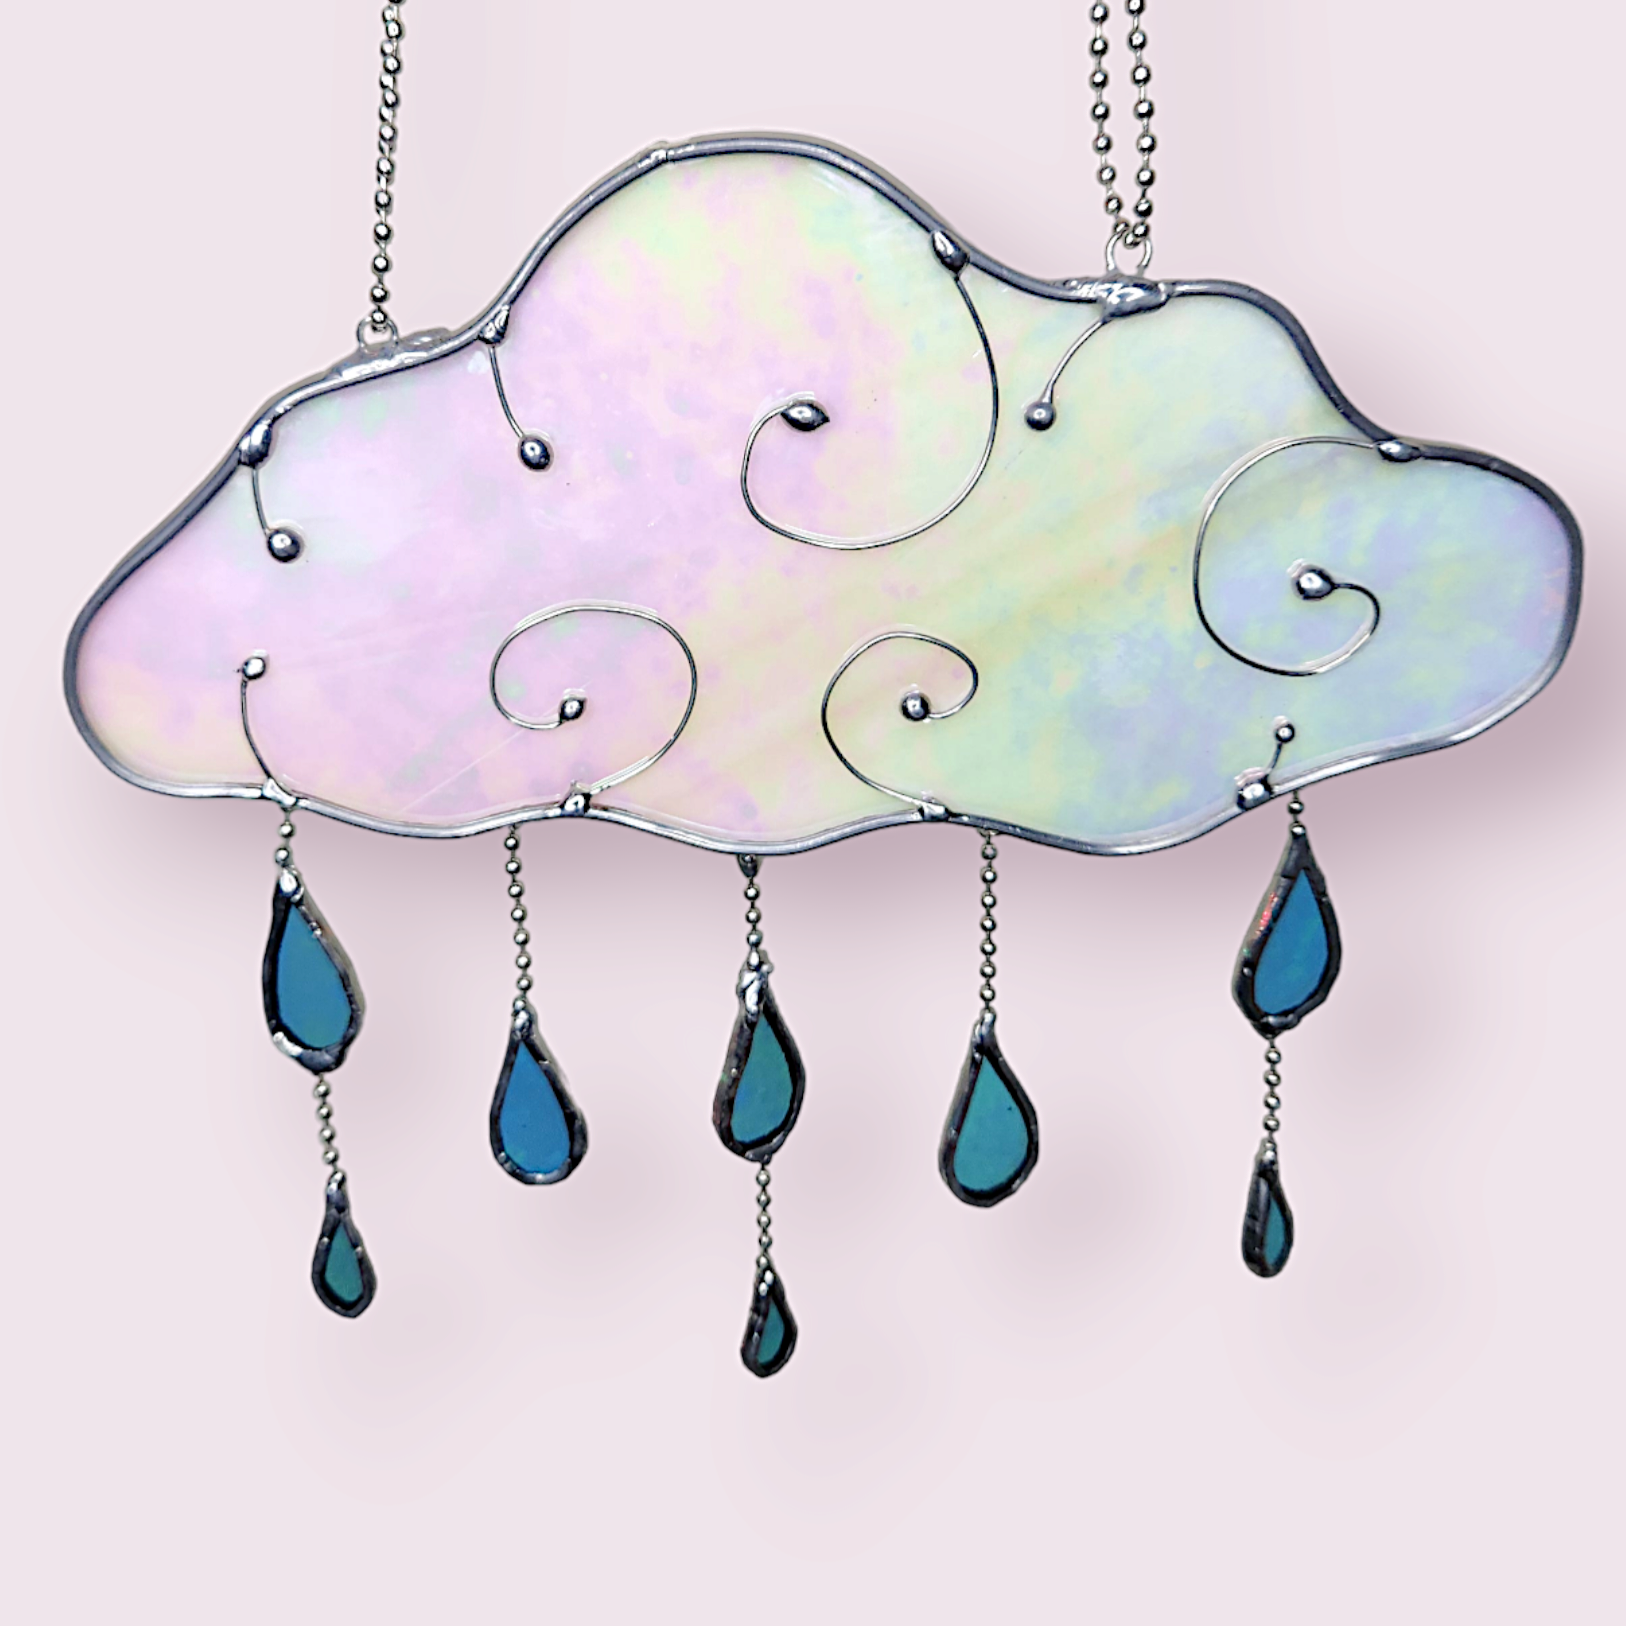 Rain Cloud Suncatcher - Sugar & Spice Crafts. Front view of hanging rain cloud and dangling blue drops. The cloud has wire swirls and iridescent glass.